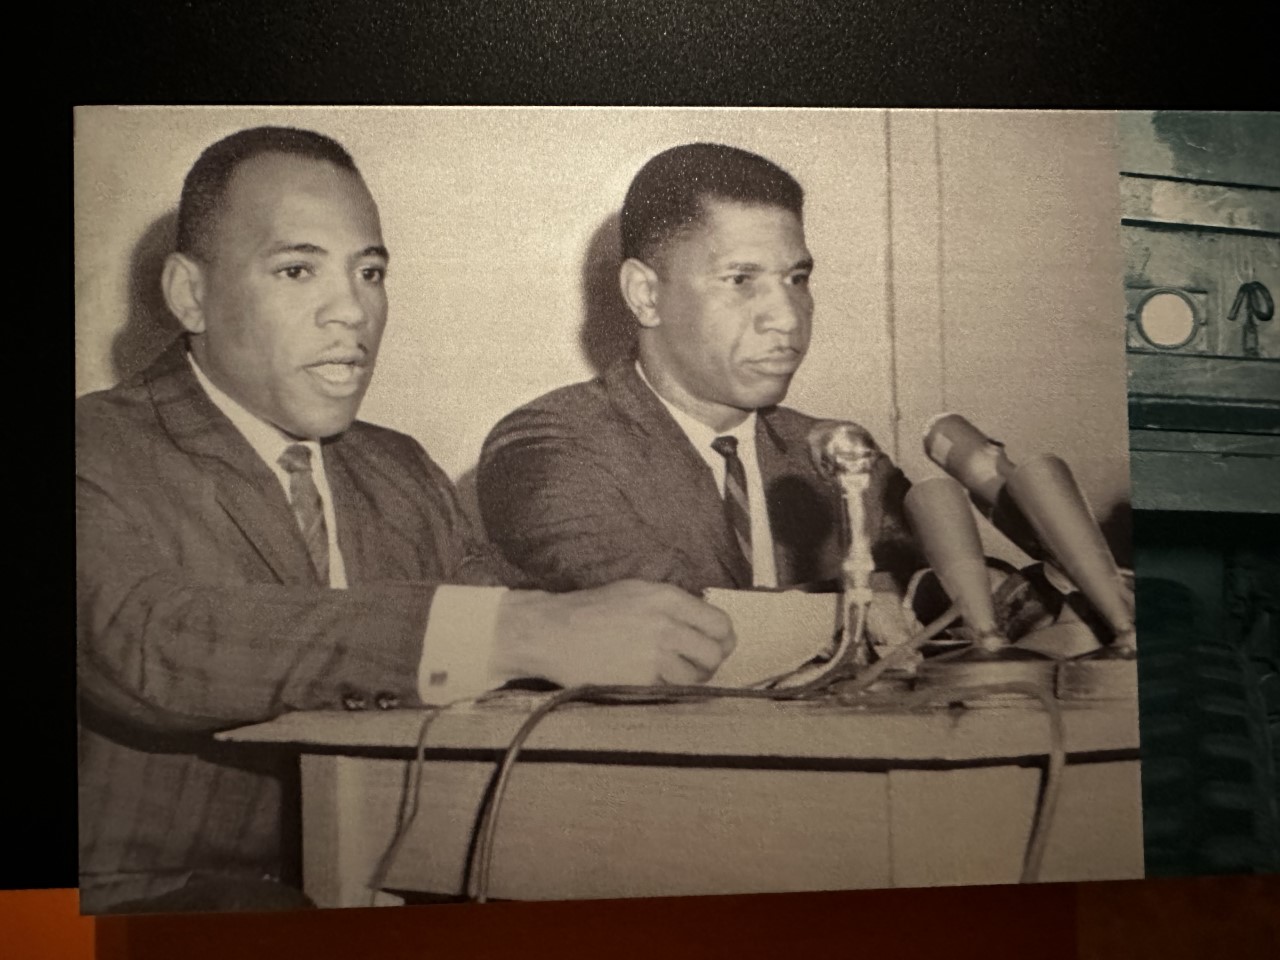 James Meredith with NAACP field secretary Medgar Evers. Photo courtesy of the Ed Meek Collection, University of Mississippi 1962. Joint ownership between Ed Meek, The University of Mississippi, The School of Journalism and New Media and The Department of Archives and Special Collections.